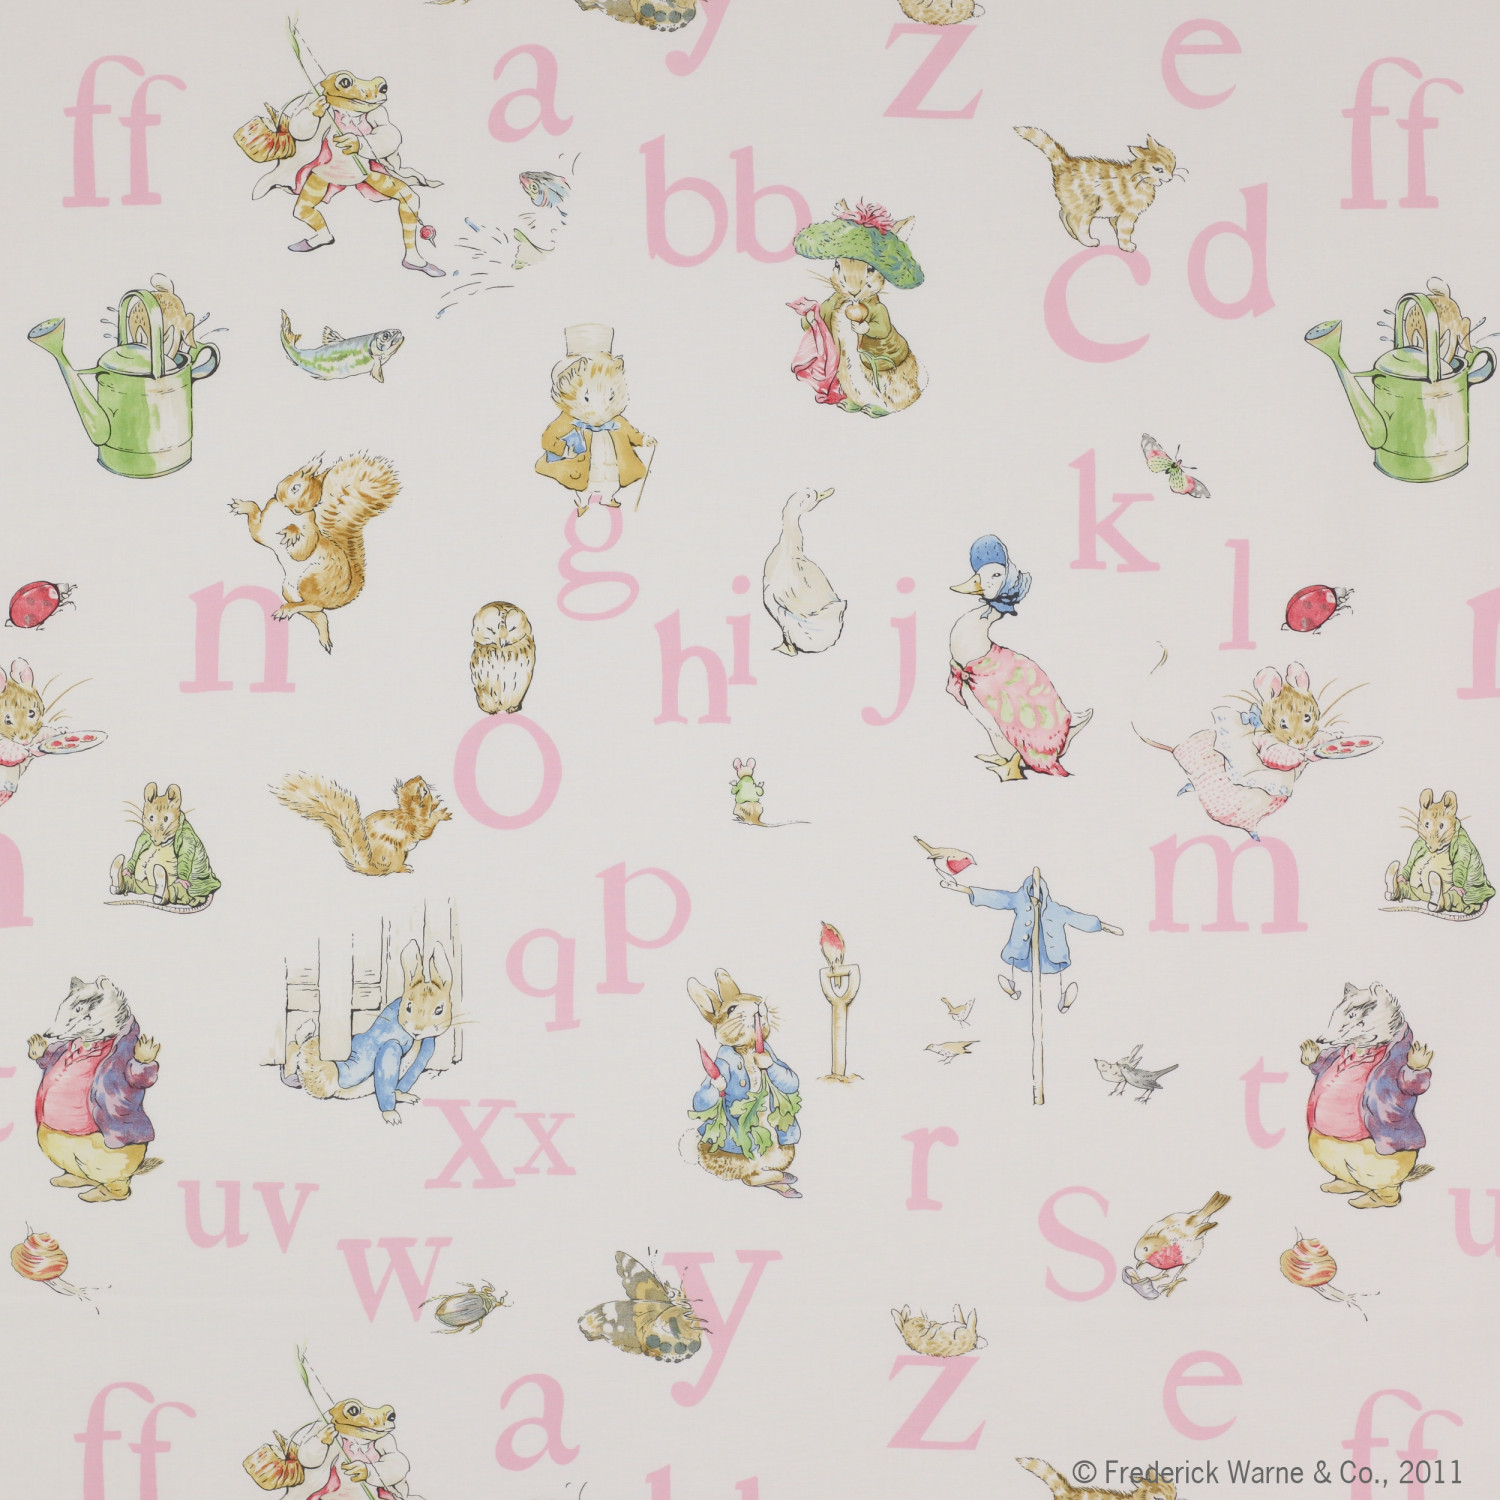 New Beatrix Potter wallpapers have arrived at Murals Your Way just in time  for some Easter inspiration Bring the sprit of springtime to a  Instagram